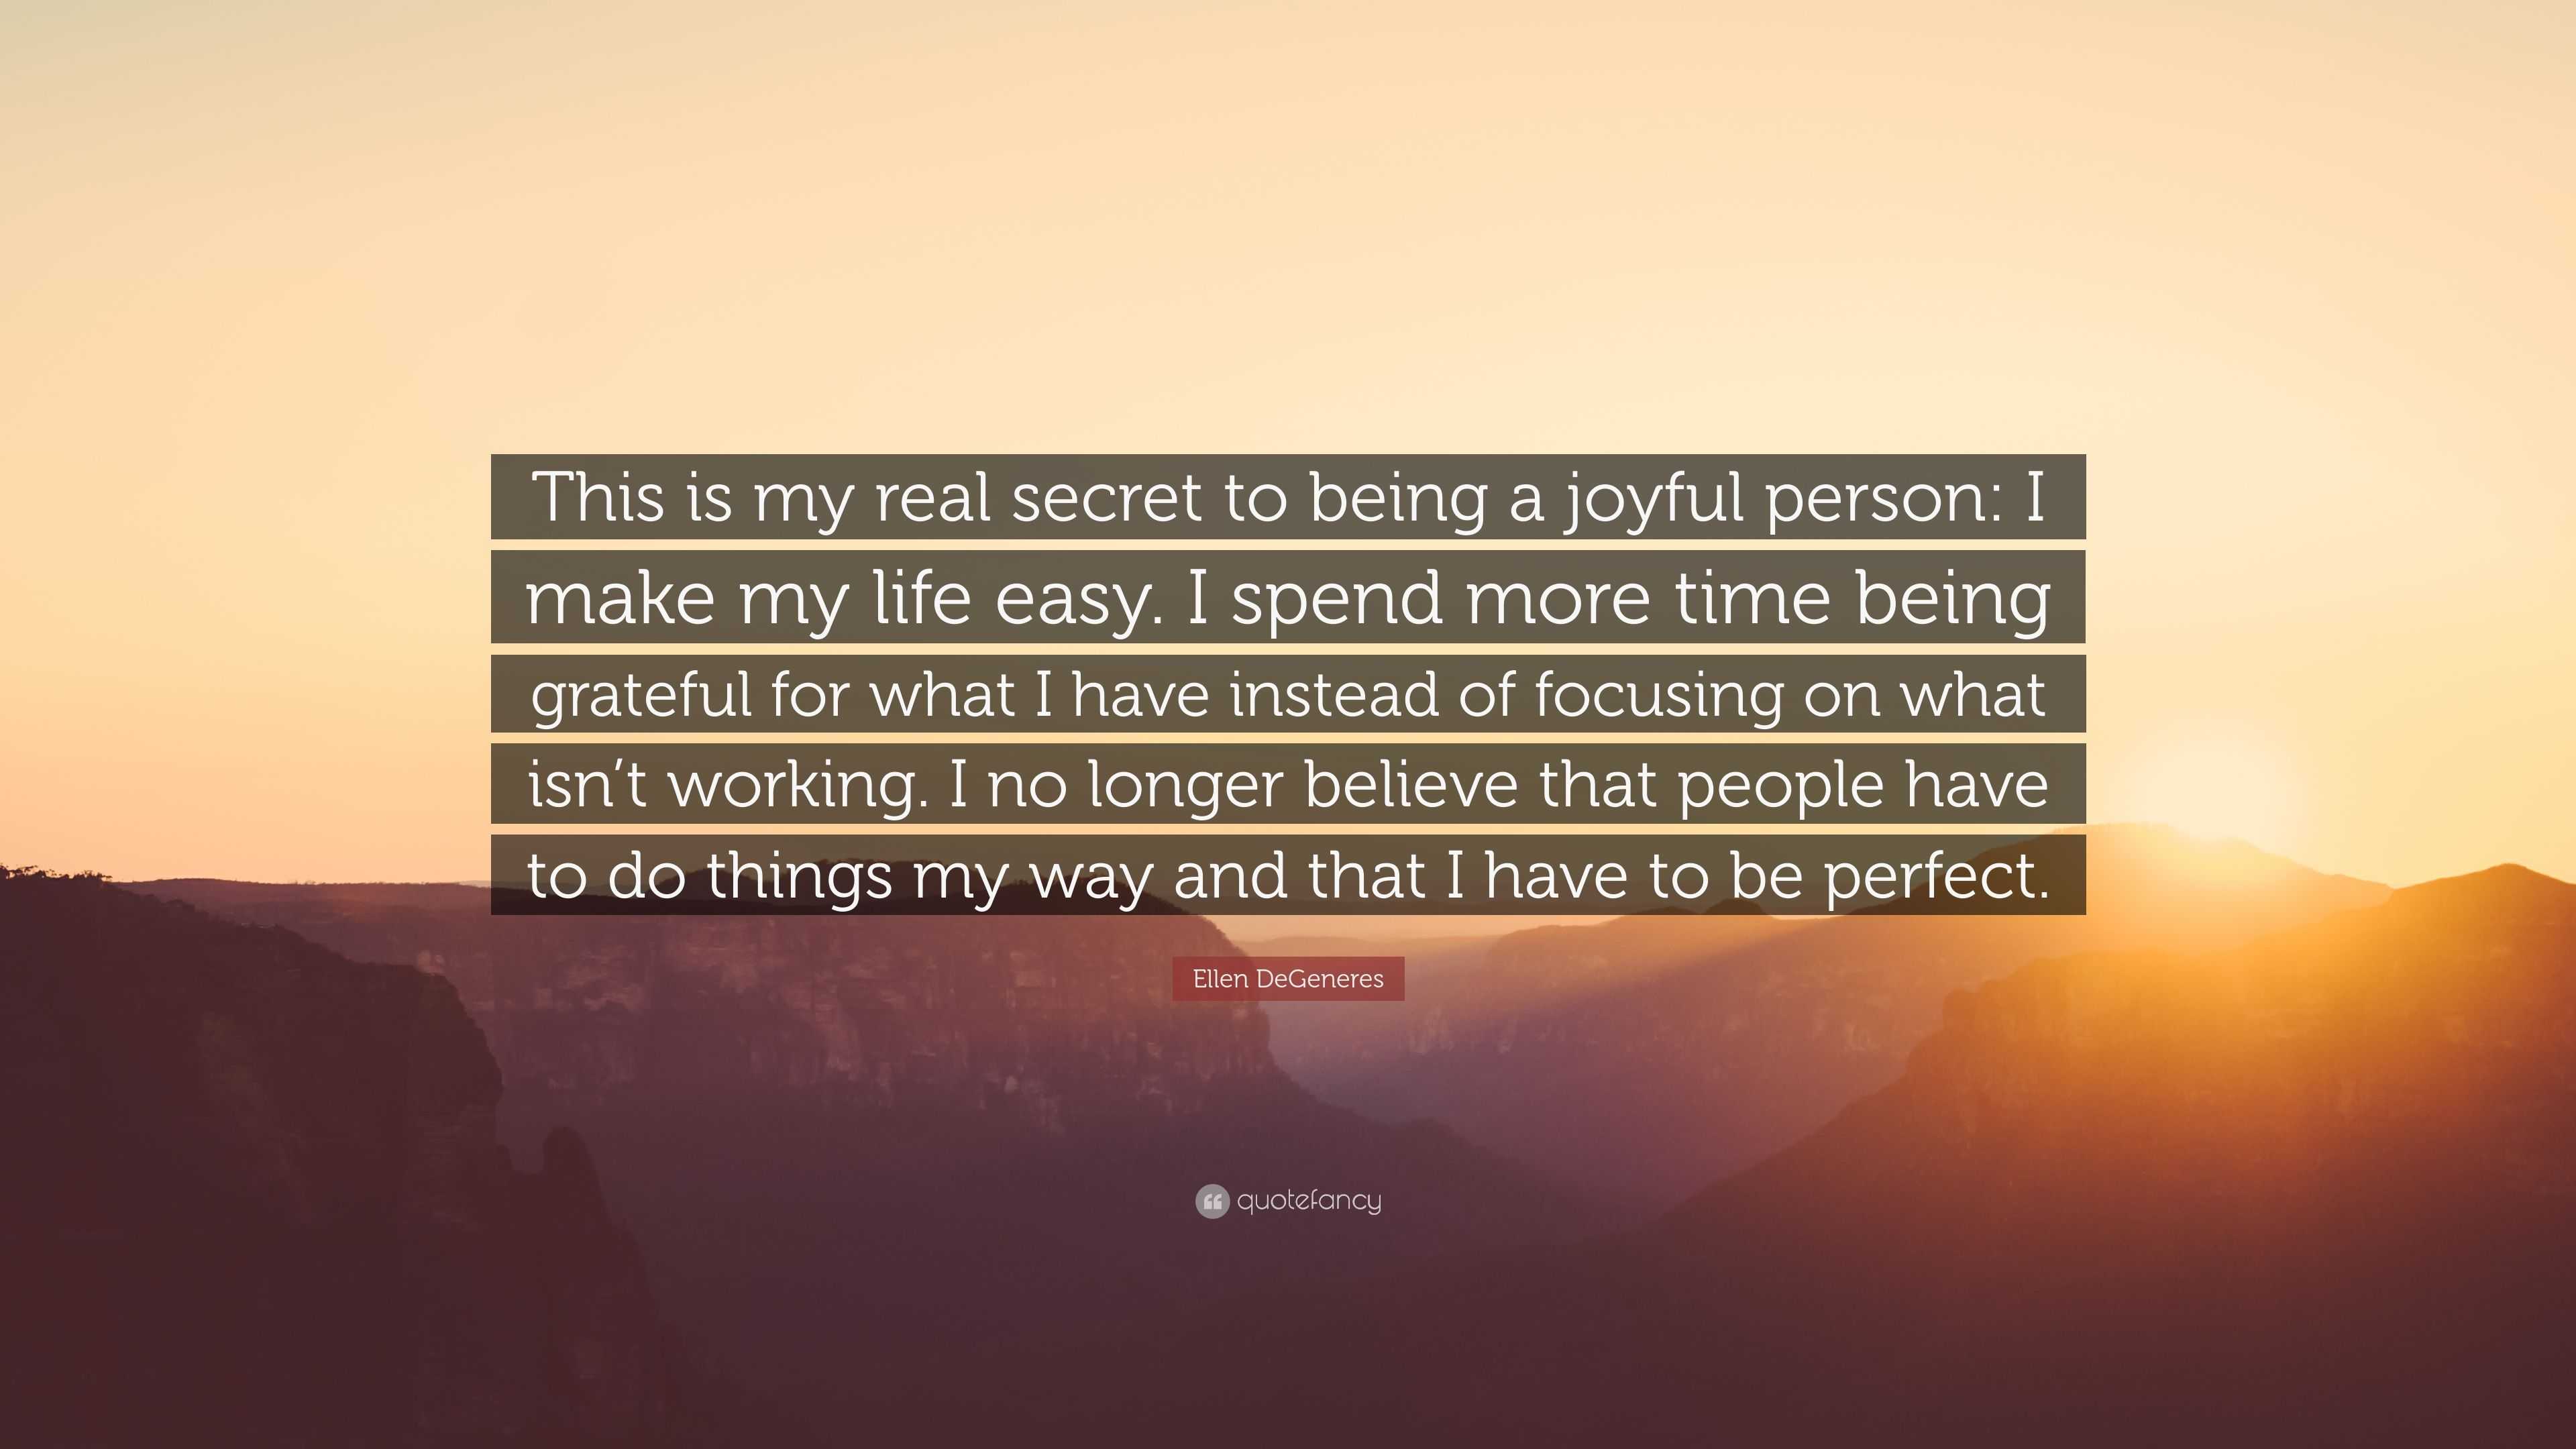 quotes about being grateful for life ellen degeneres quote u201cthis is my real secret to being a joyful